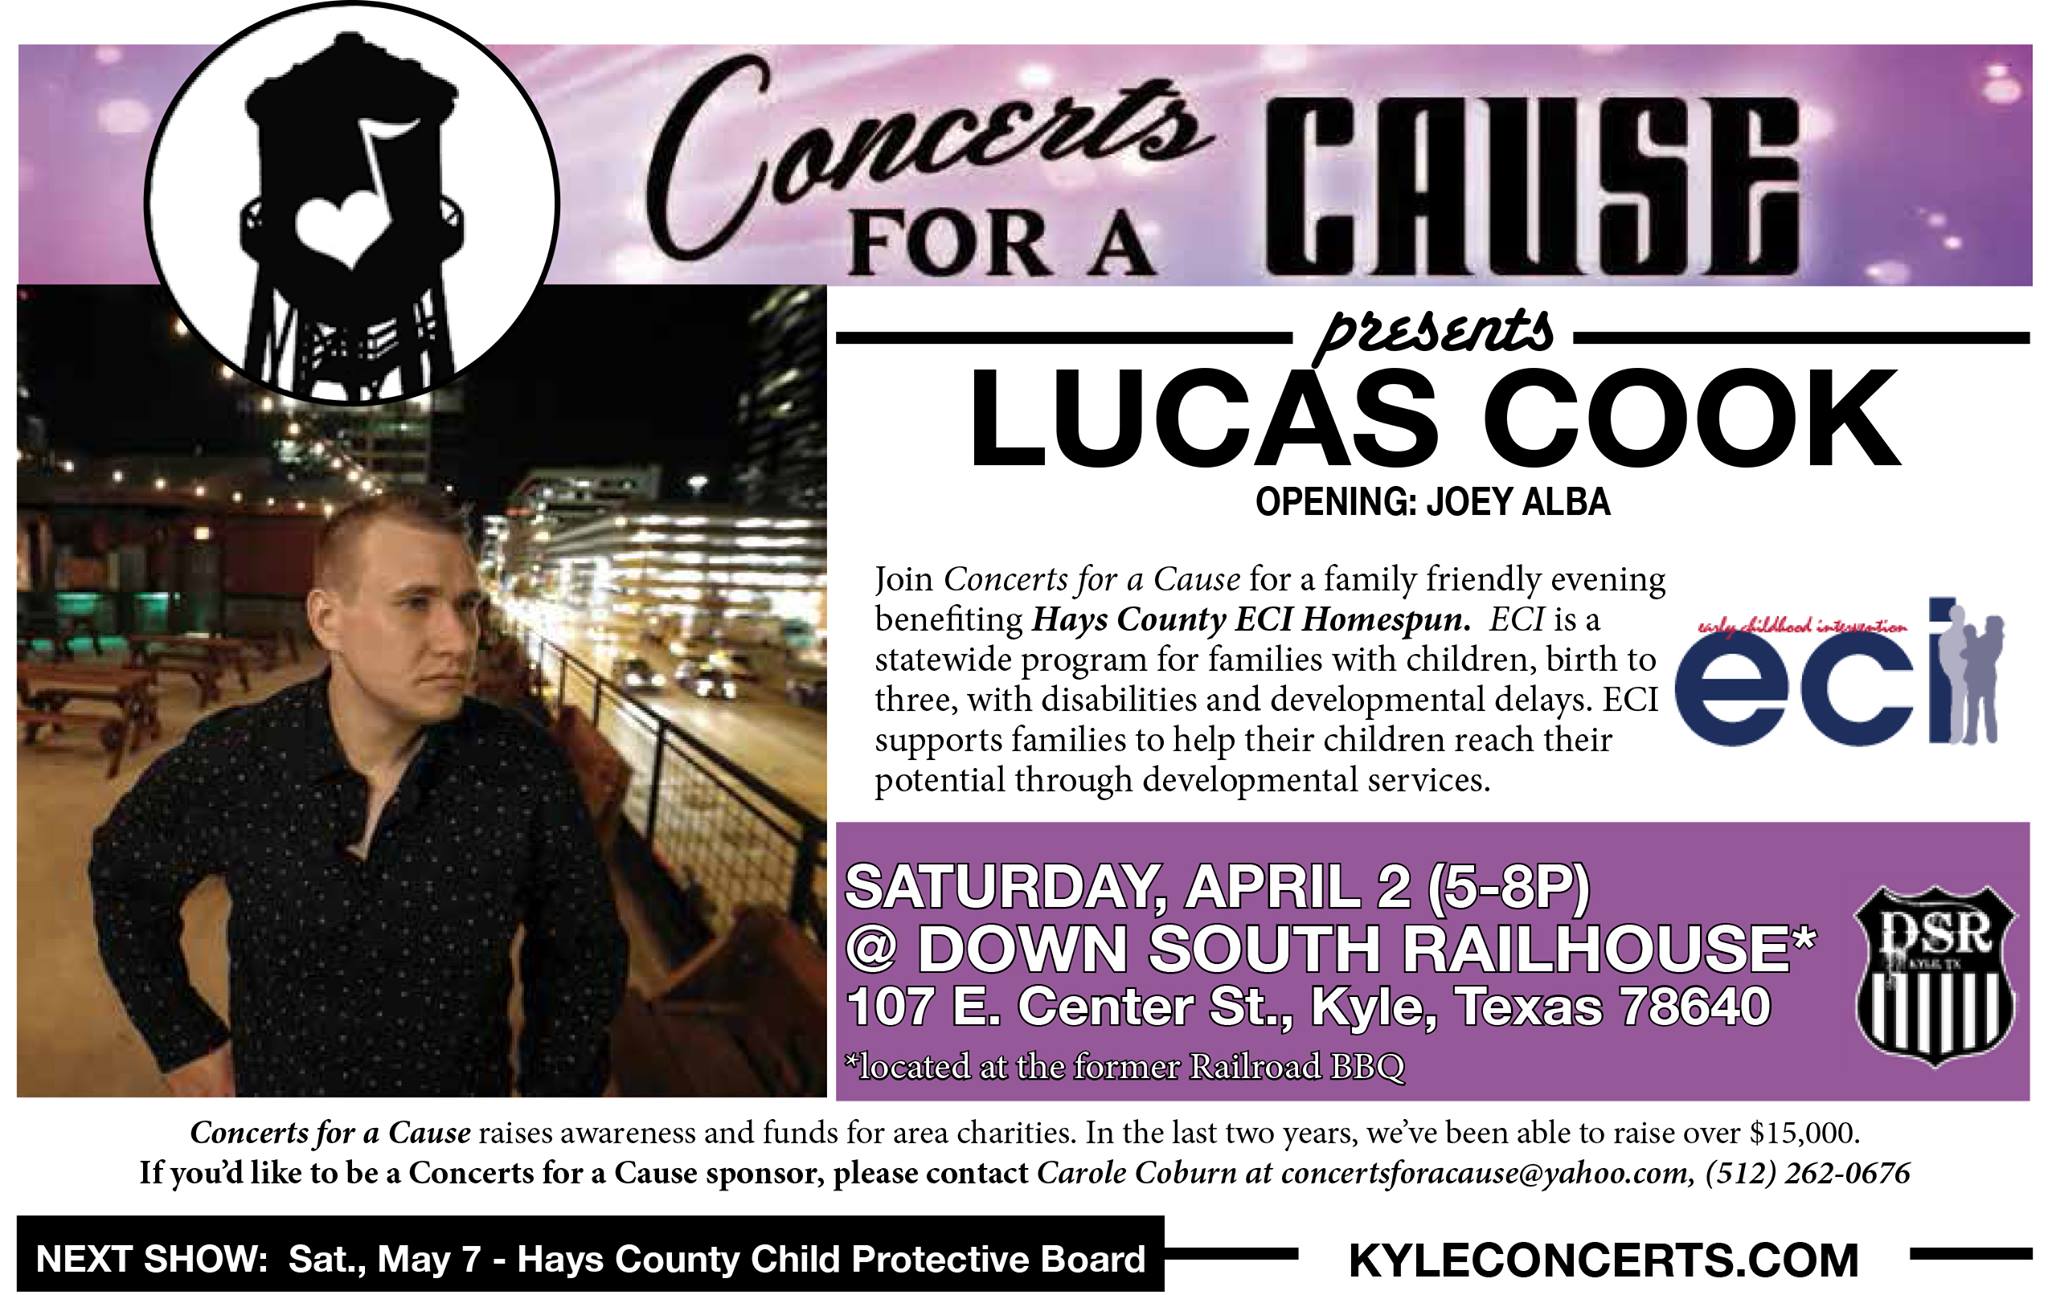 Concerts For A Cause for Hays County ECI/Homespun